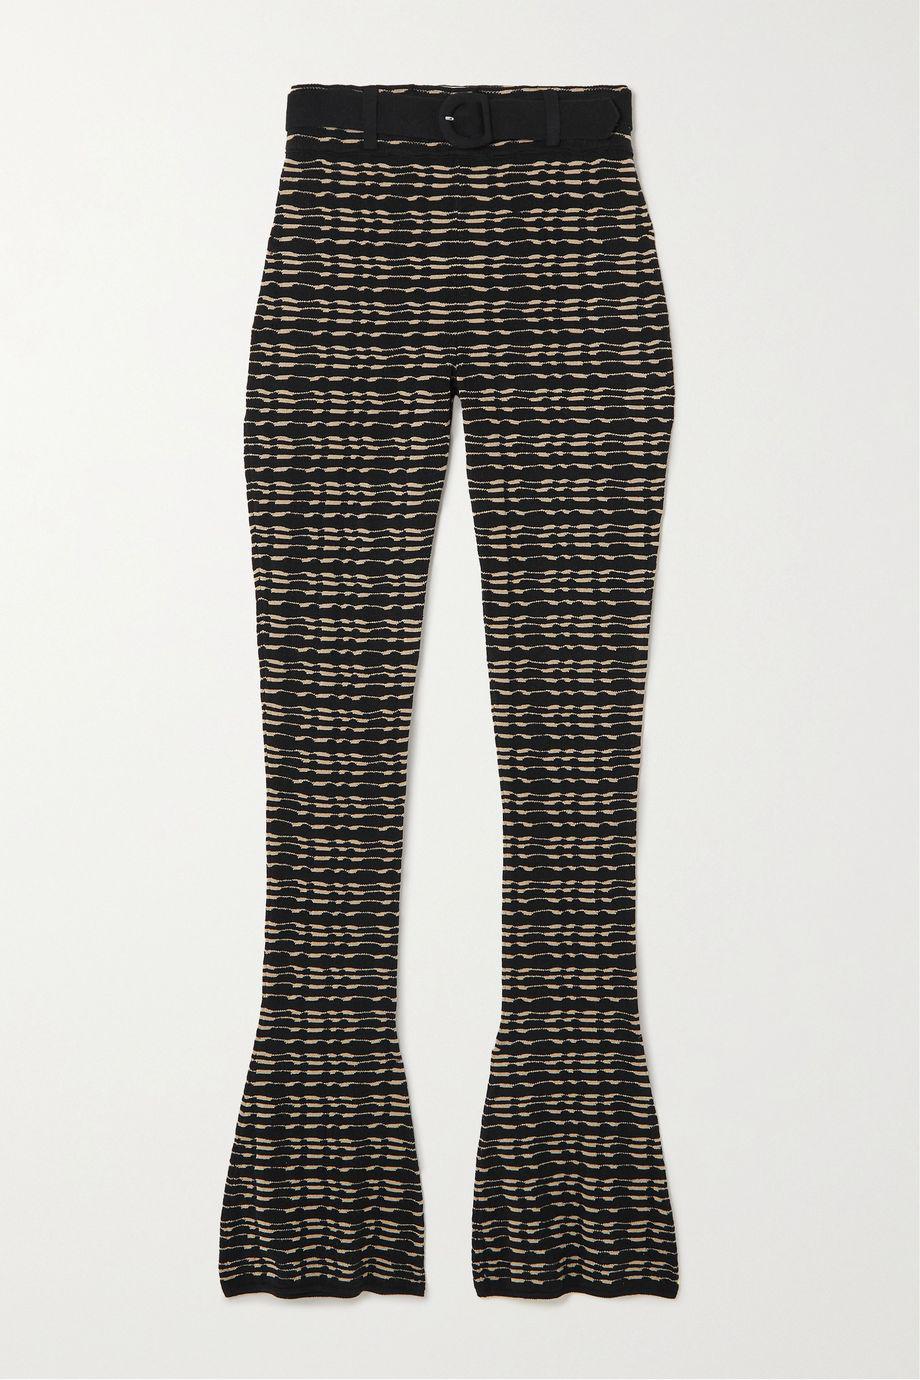 Belted jacquard-knit flared pants by CONNER IVES